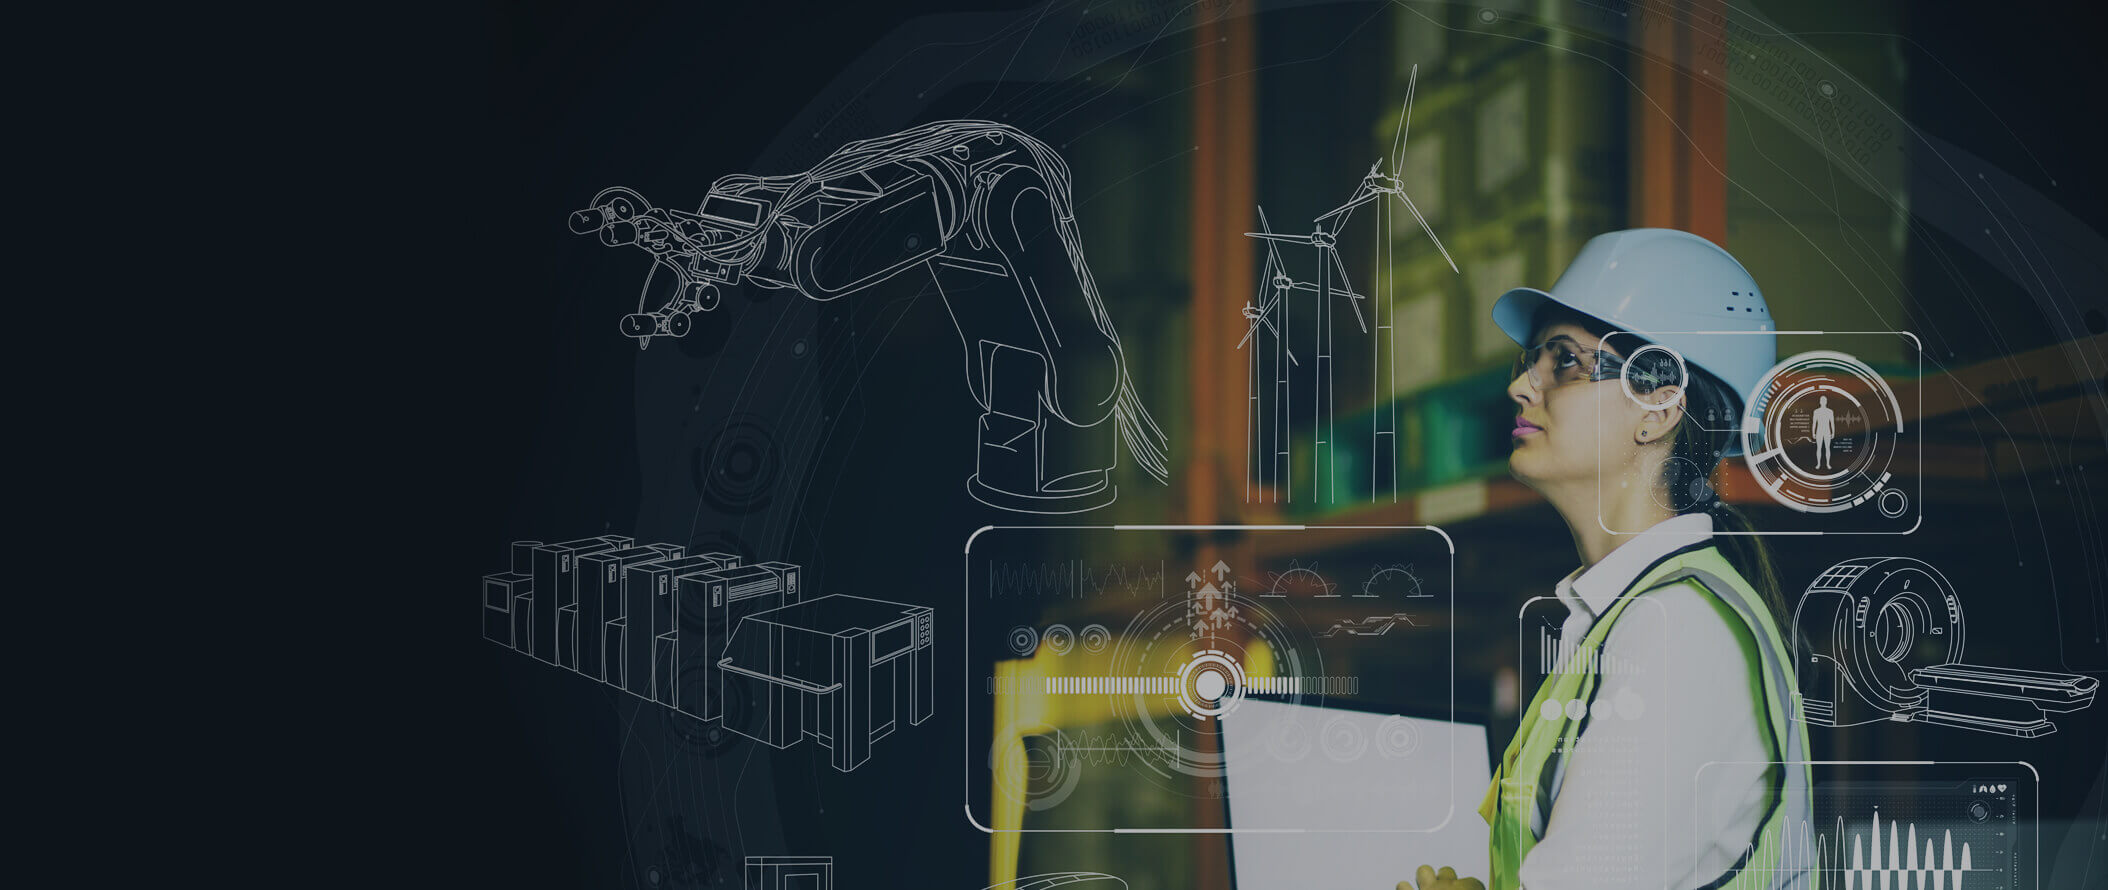 4 Innovative Things You Can Do With IIoT Technology